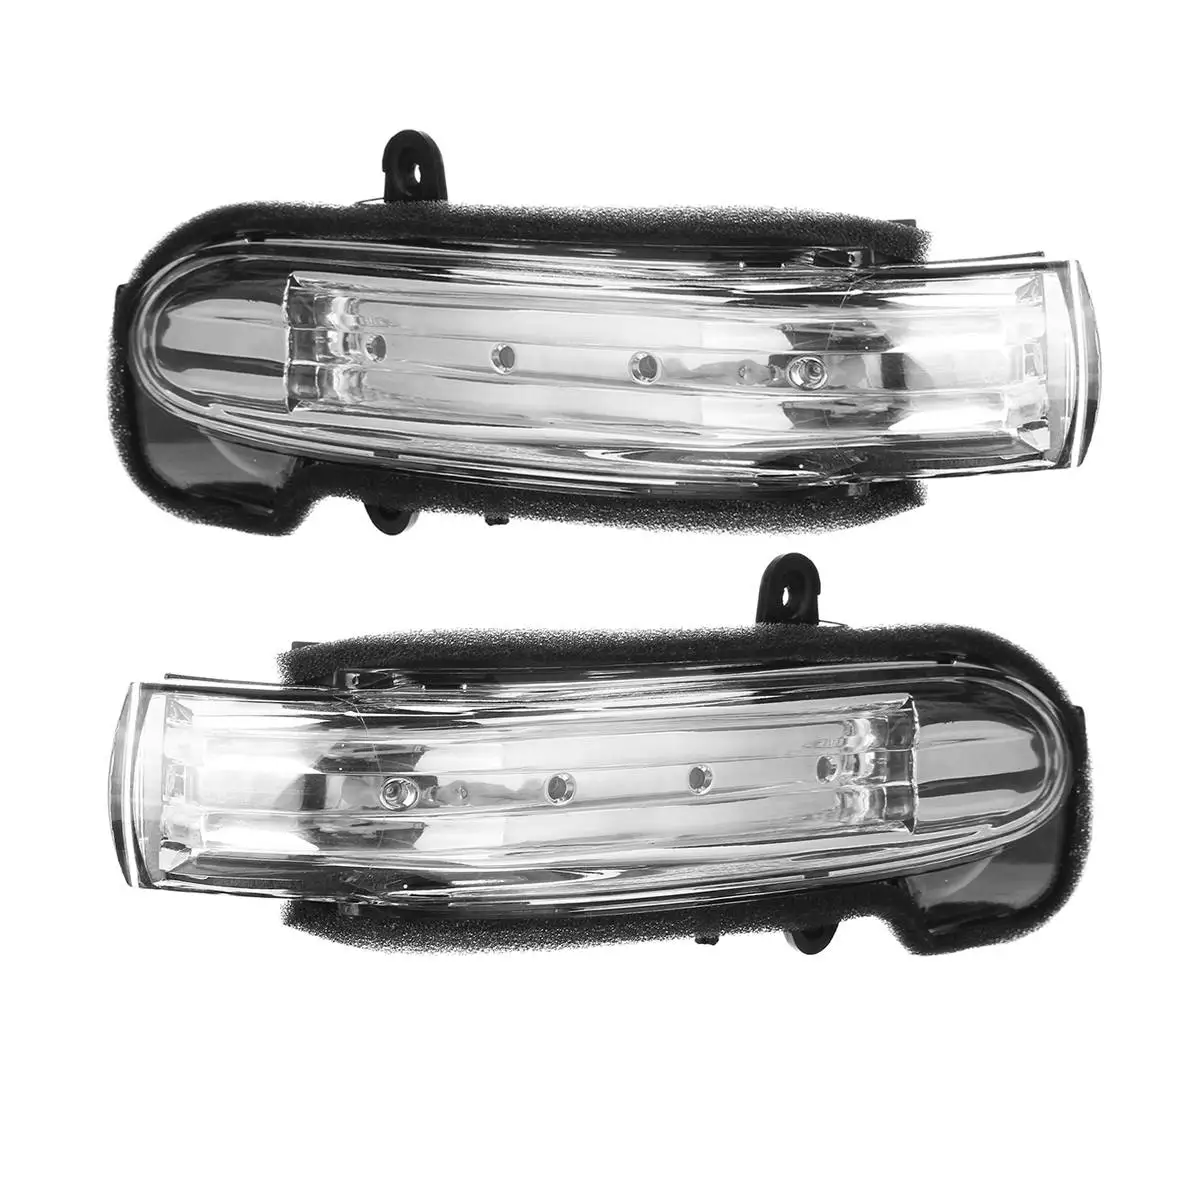 Pair LED Side Rearview Mirror Light Turn Signal Indicator Blinker For Mercedes For Benz W203 4Dr 2004-2007 Rear View Mirror Lamp